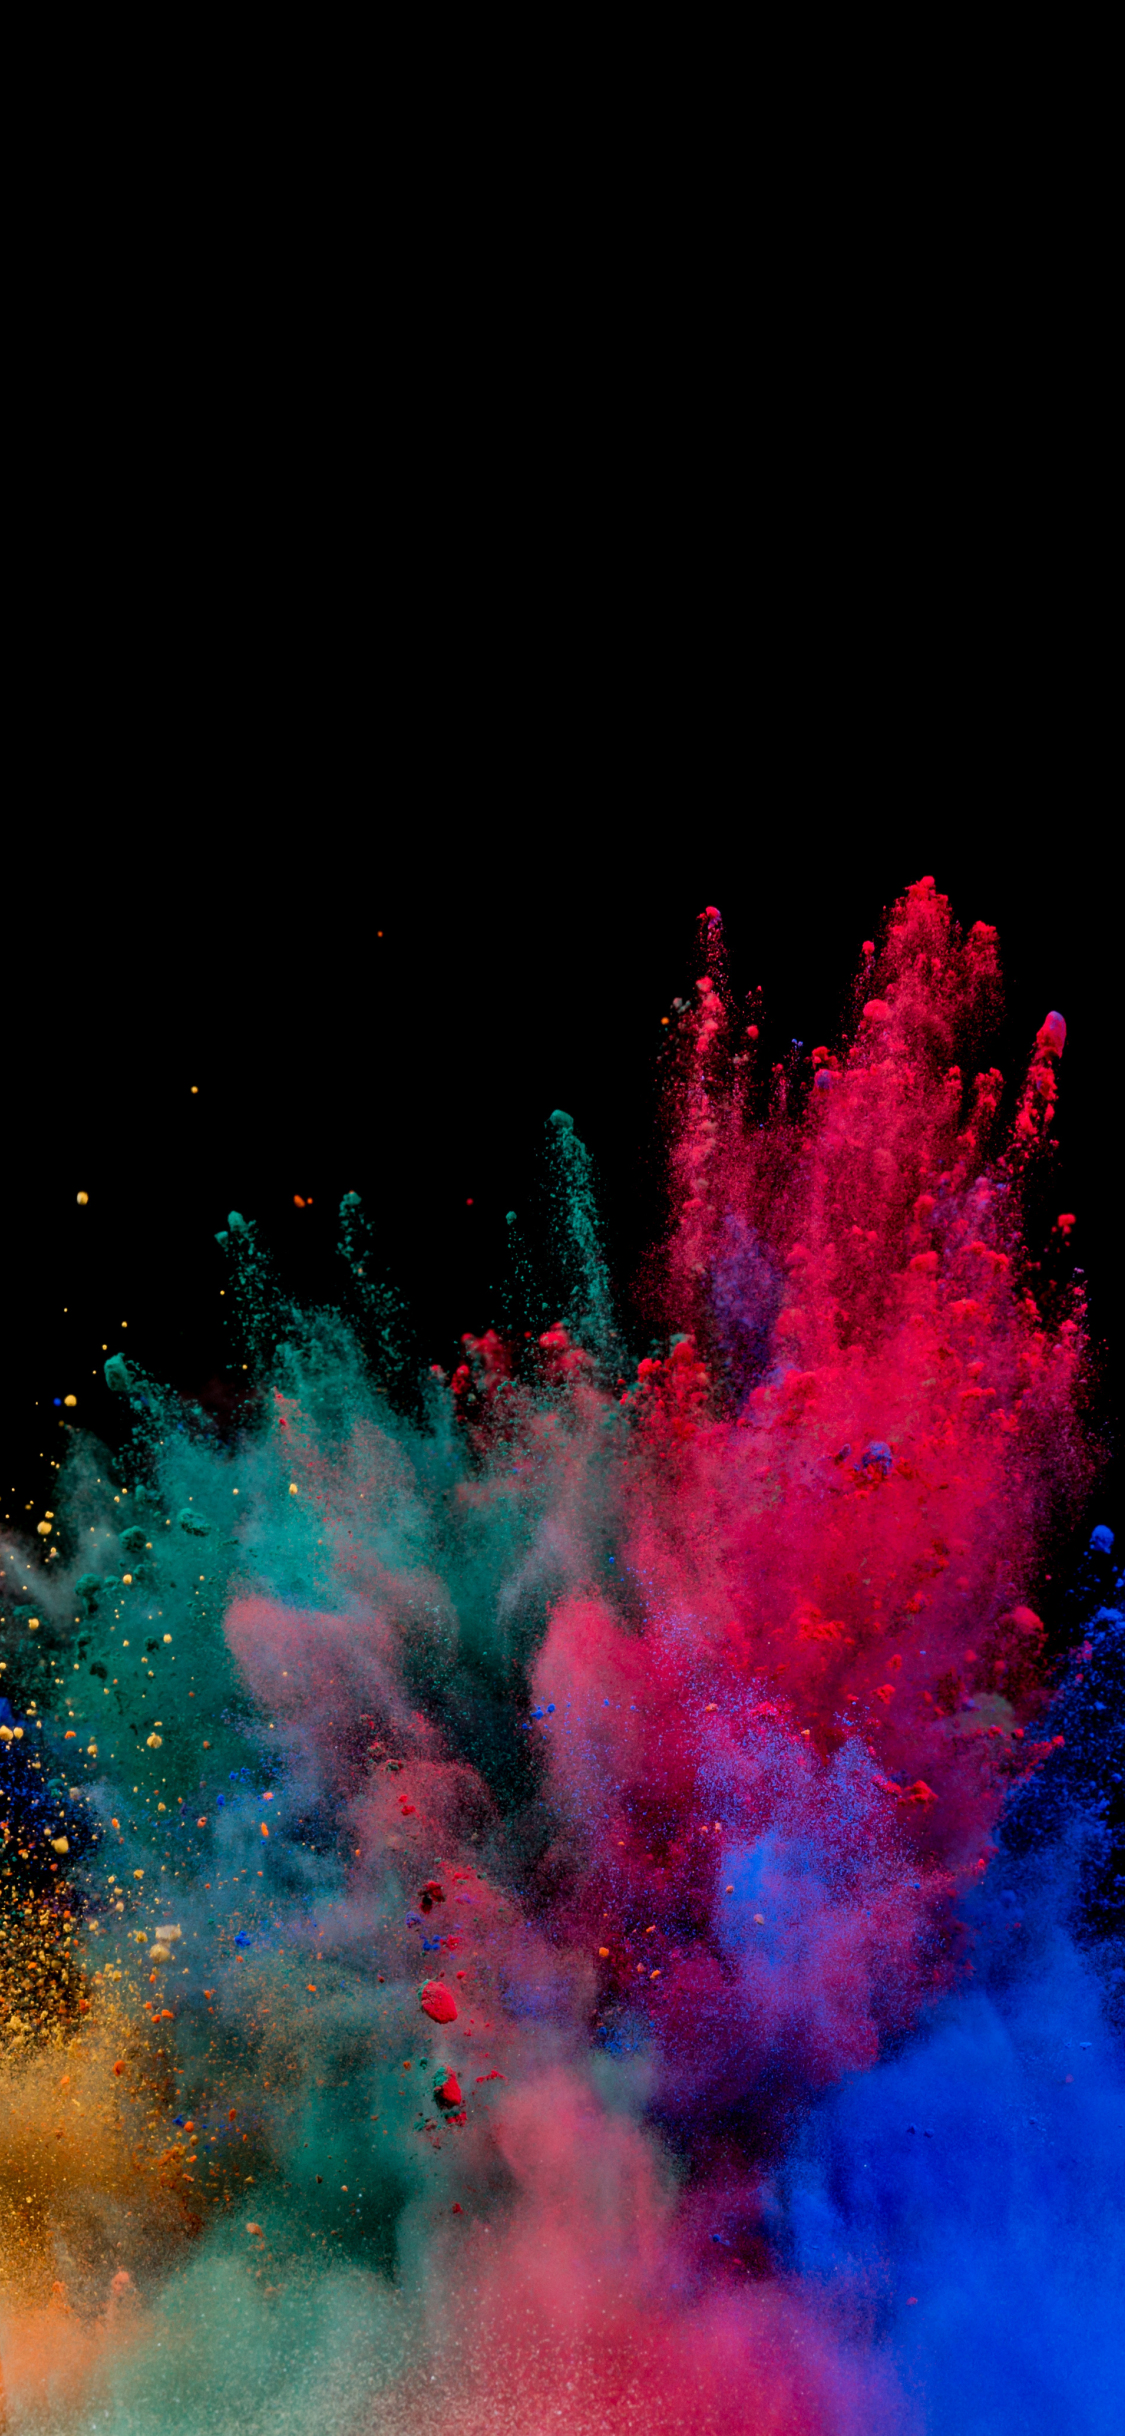 Download 1125x2436 Wallpaper Colors Blast Explosion Colorful Iphone